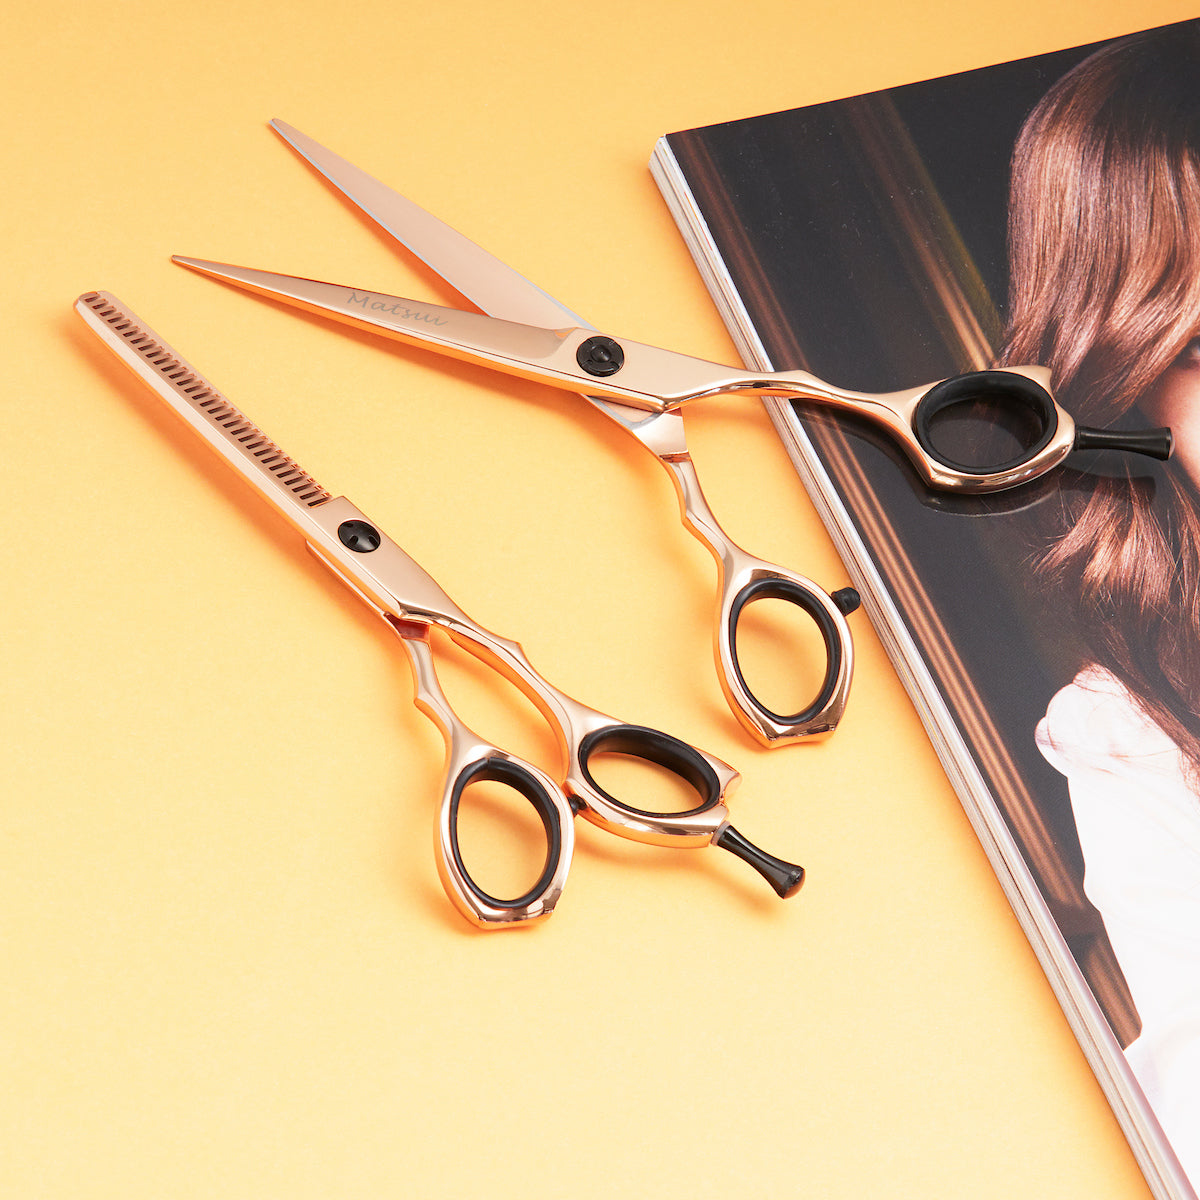 Professional Matsui Precision Rose Gold Hairdressing Scissors & Thinner Combination (6743663411266)